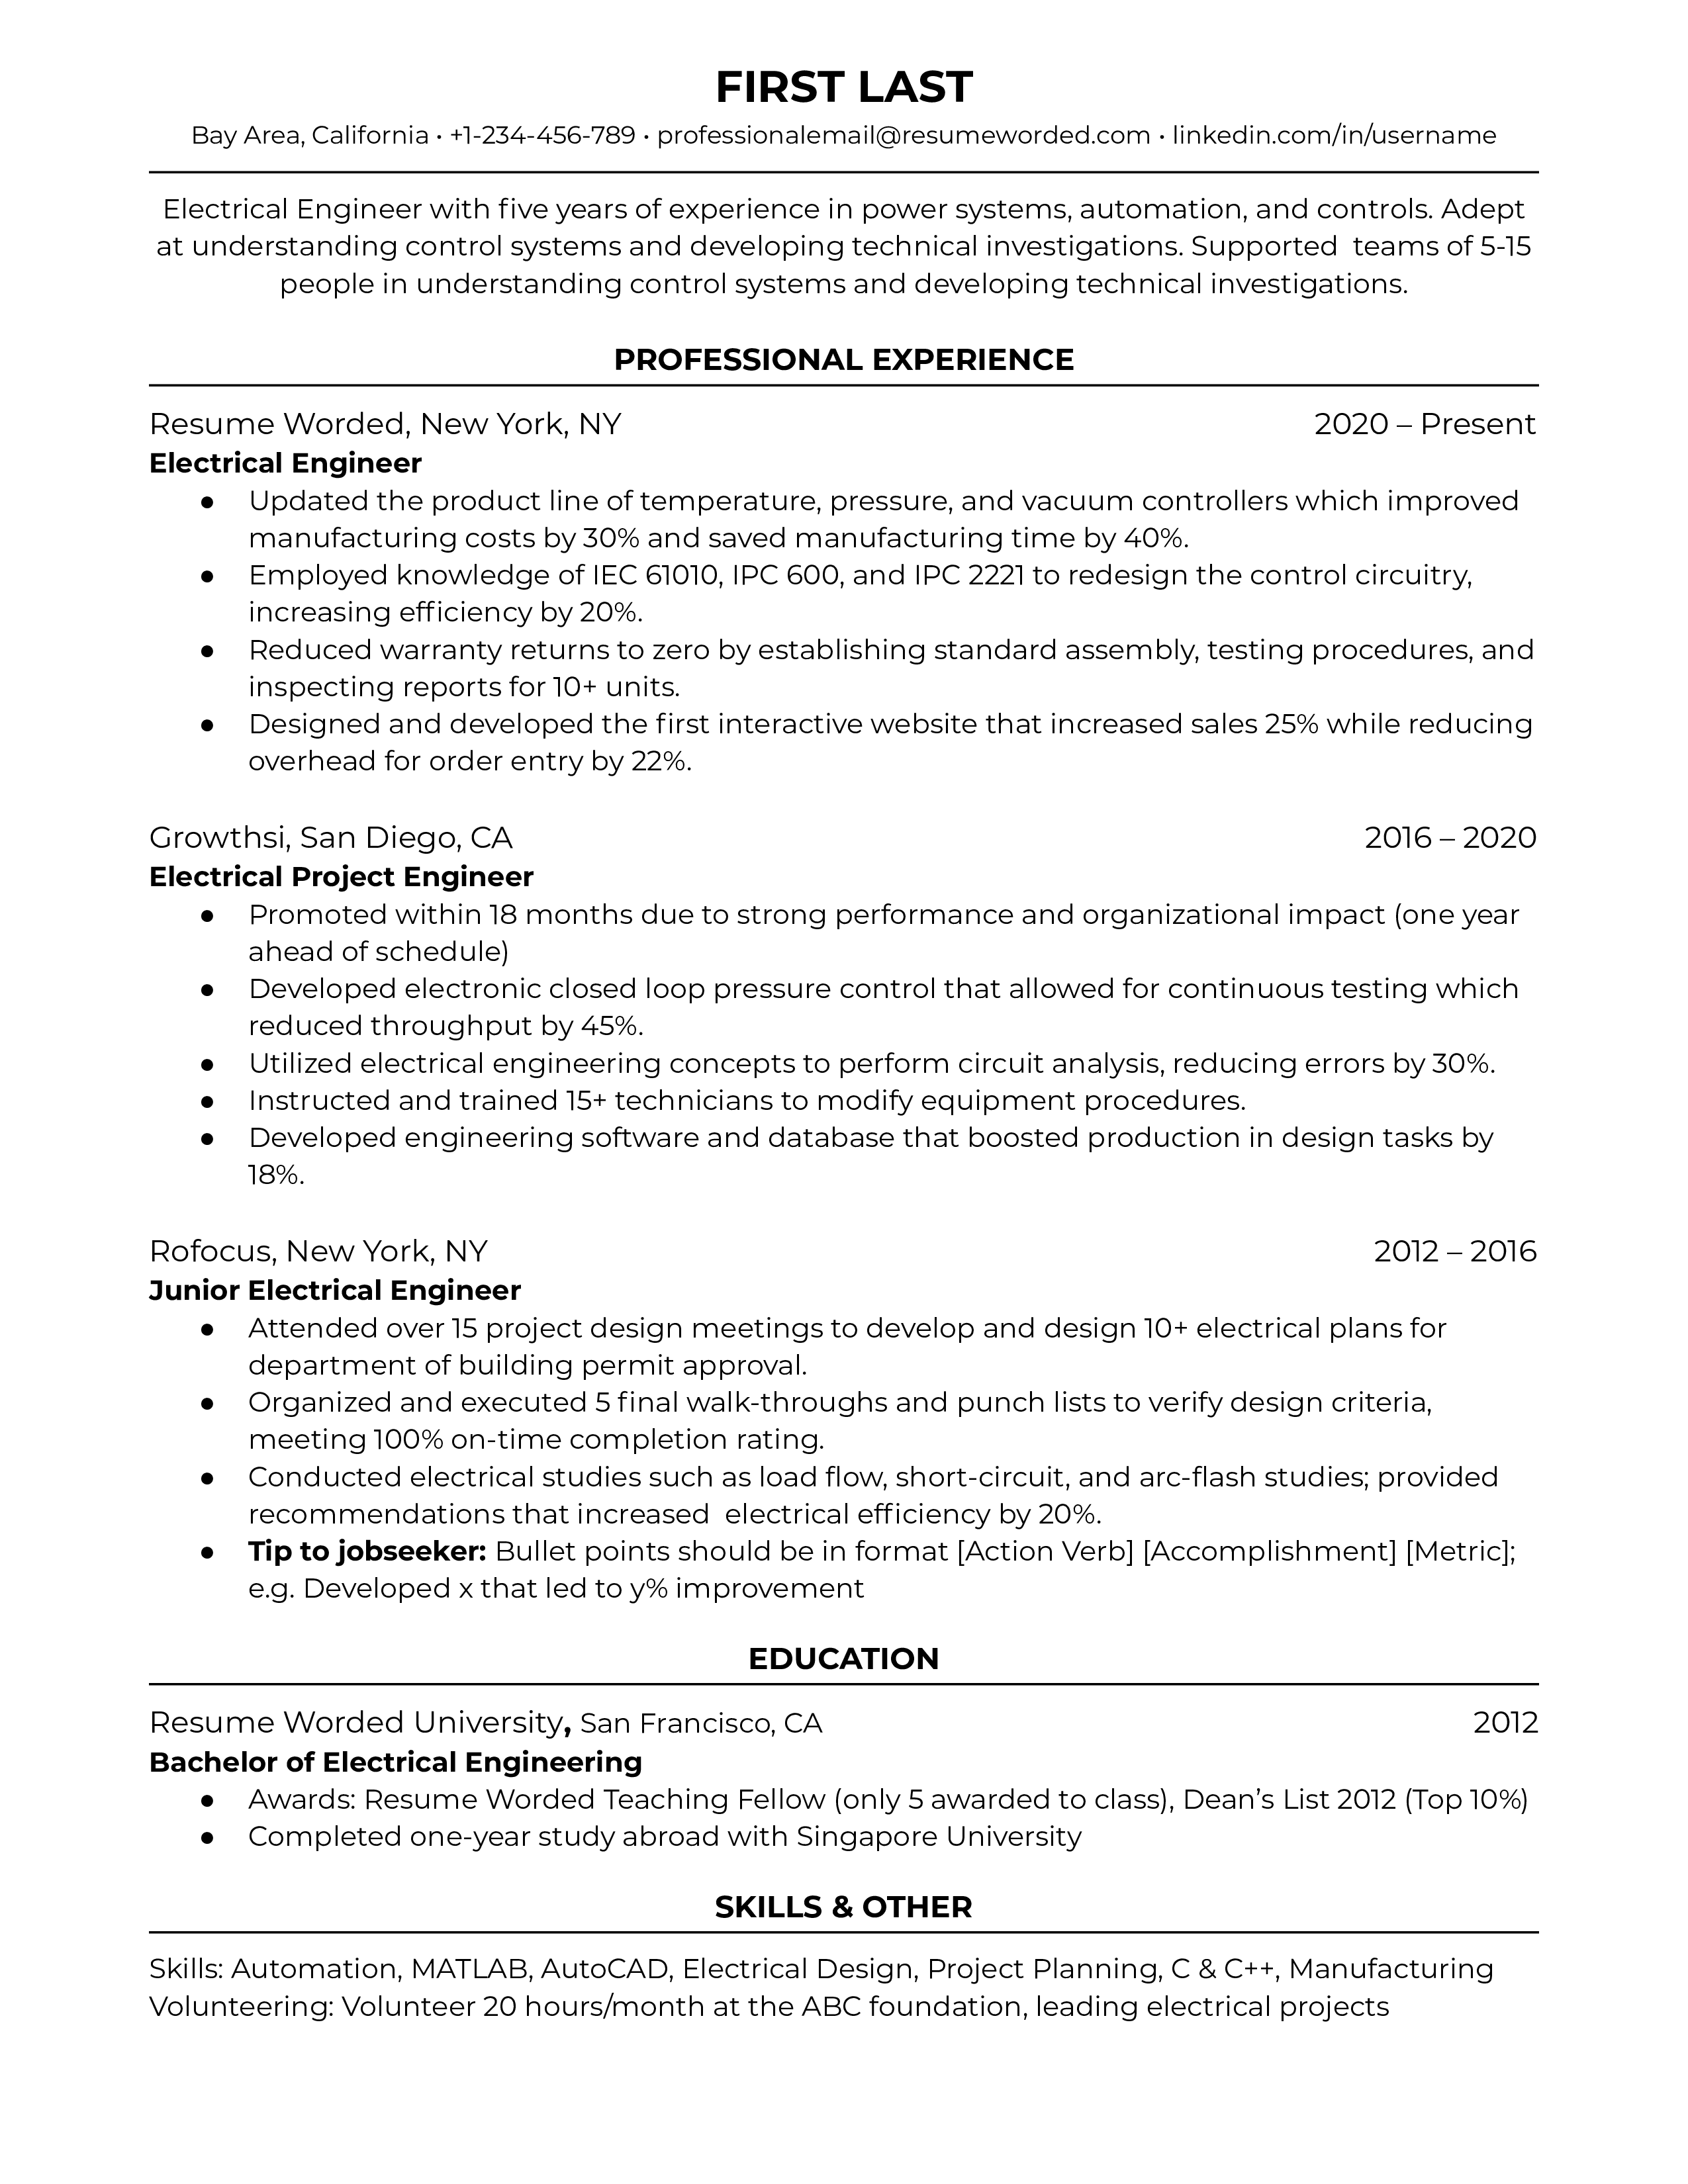 Electrical engineer resume with measurable achievements and separate skills section